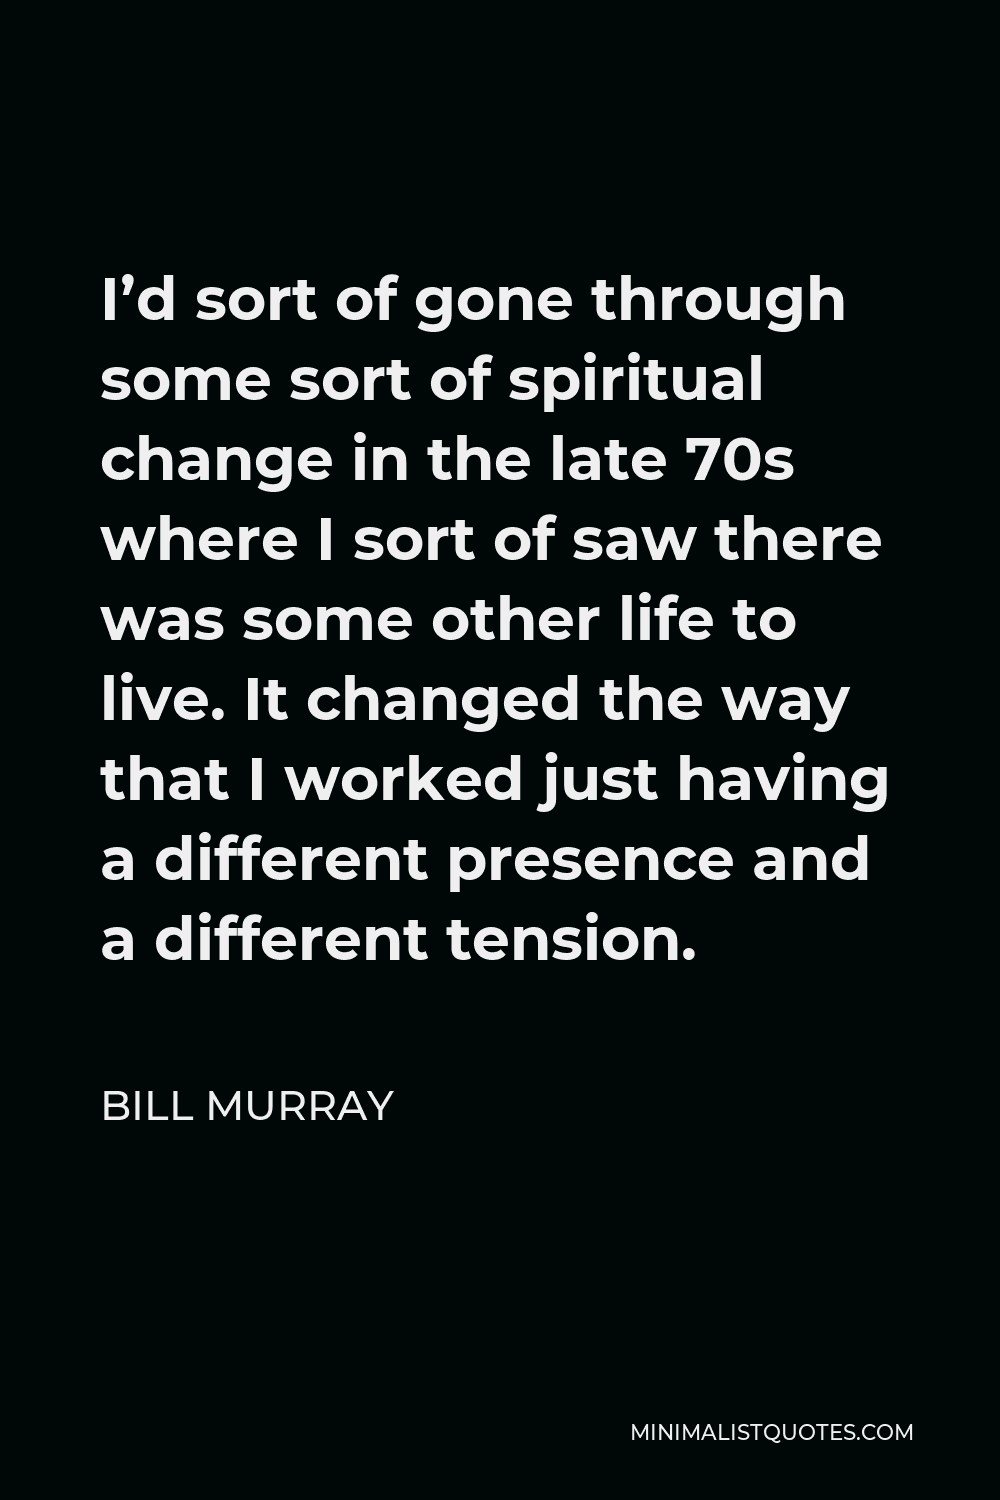 Bill Murray Quote - I’d sort of gone through some sort of spiritual change in the late 70s where I sort of saw there was some other life to live. It changed the way that I worked just having a different presence and a different tension.